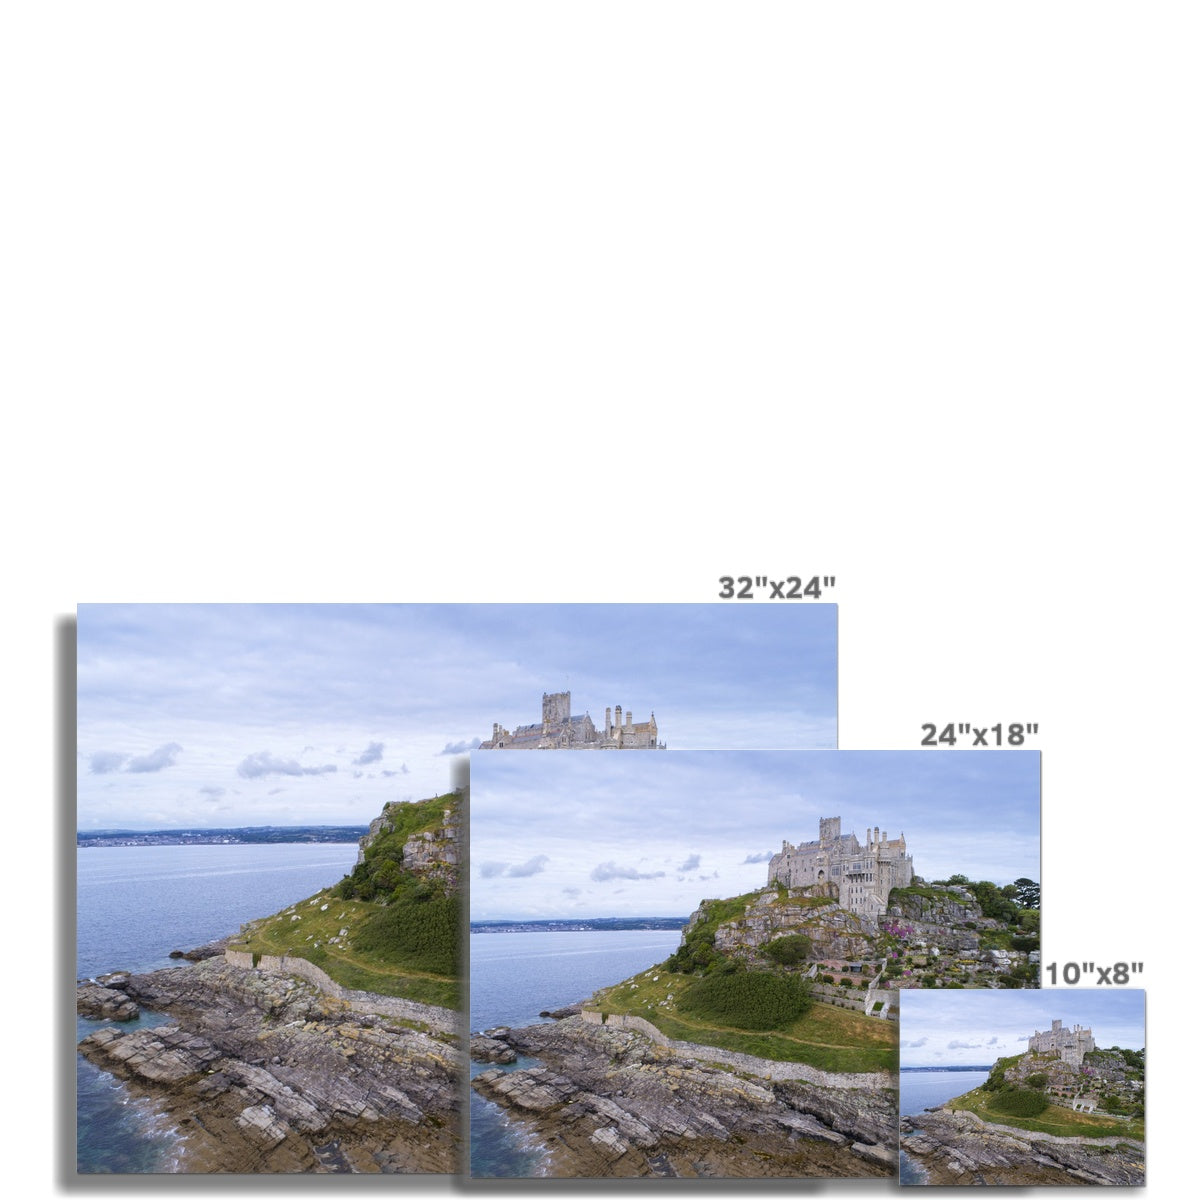 st michaels mount close up picture sizes